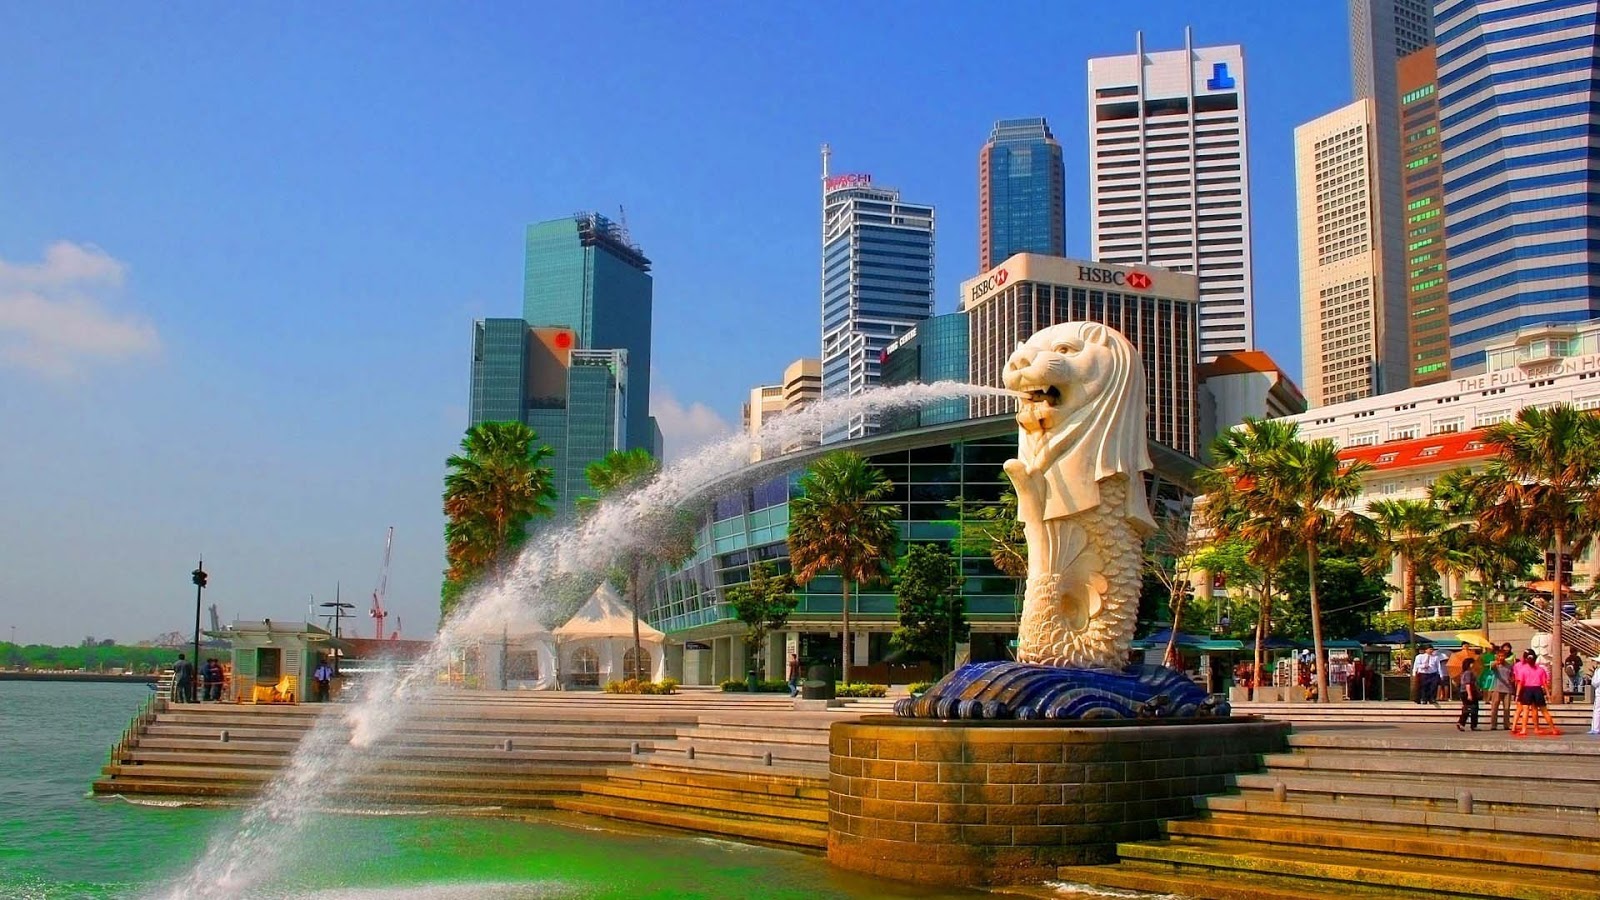 Top Rated Places to Visit in Singapore | Merlion Park - Singapore